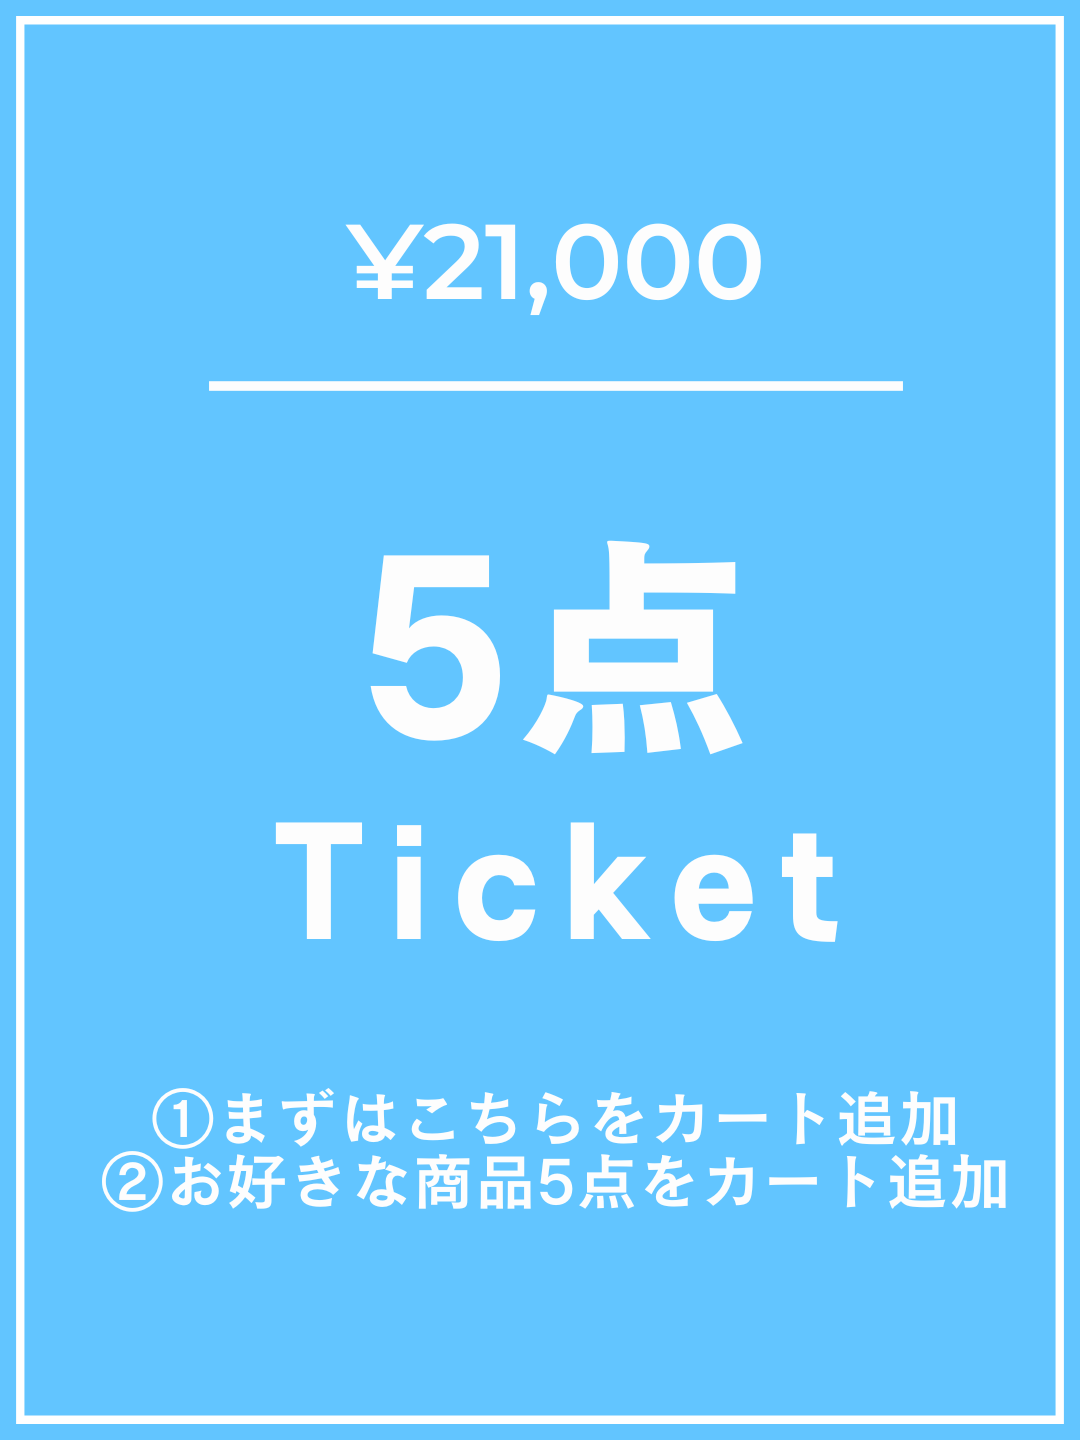 [Add this to your cart first] ¥21,000 ticket 